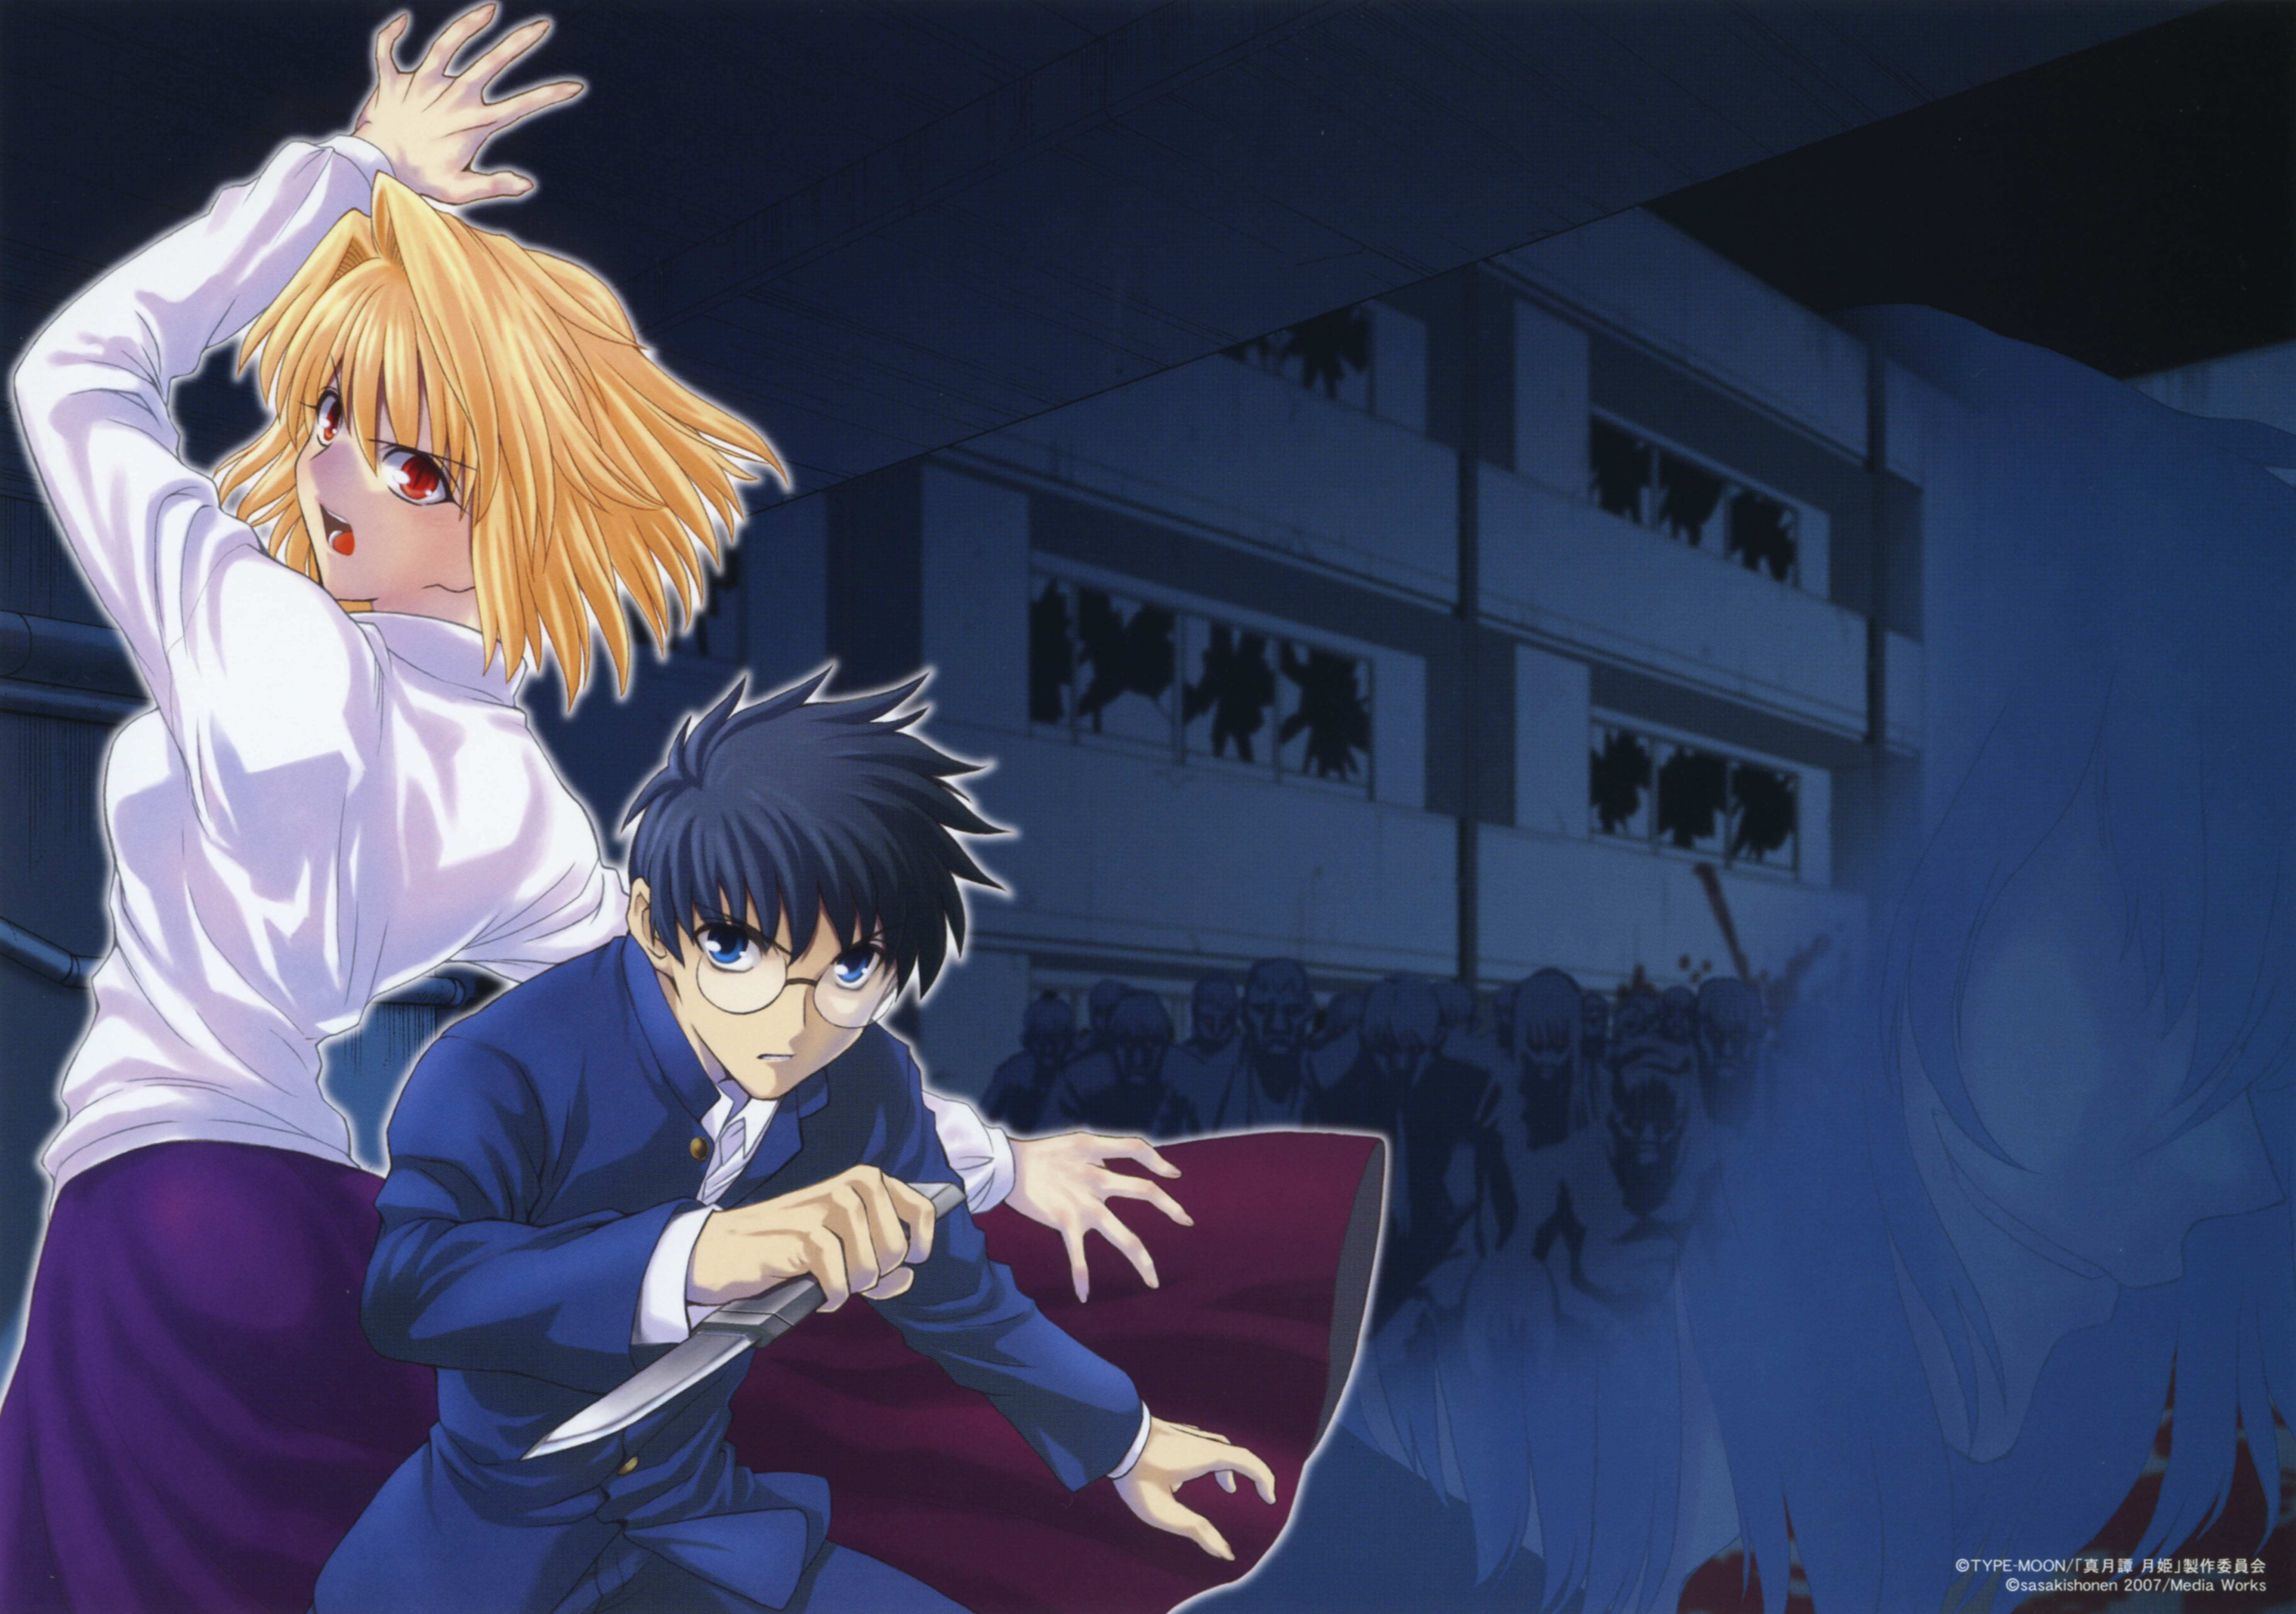 Tsukihime wallpapers, Anime, HQ Tsukihime pictures | 4K Wallpapers 2019